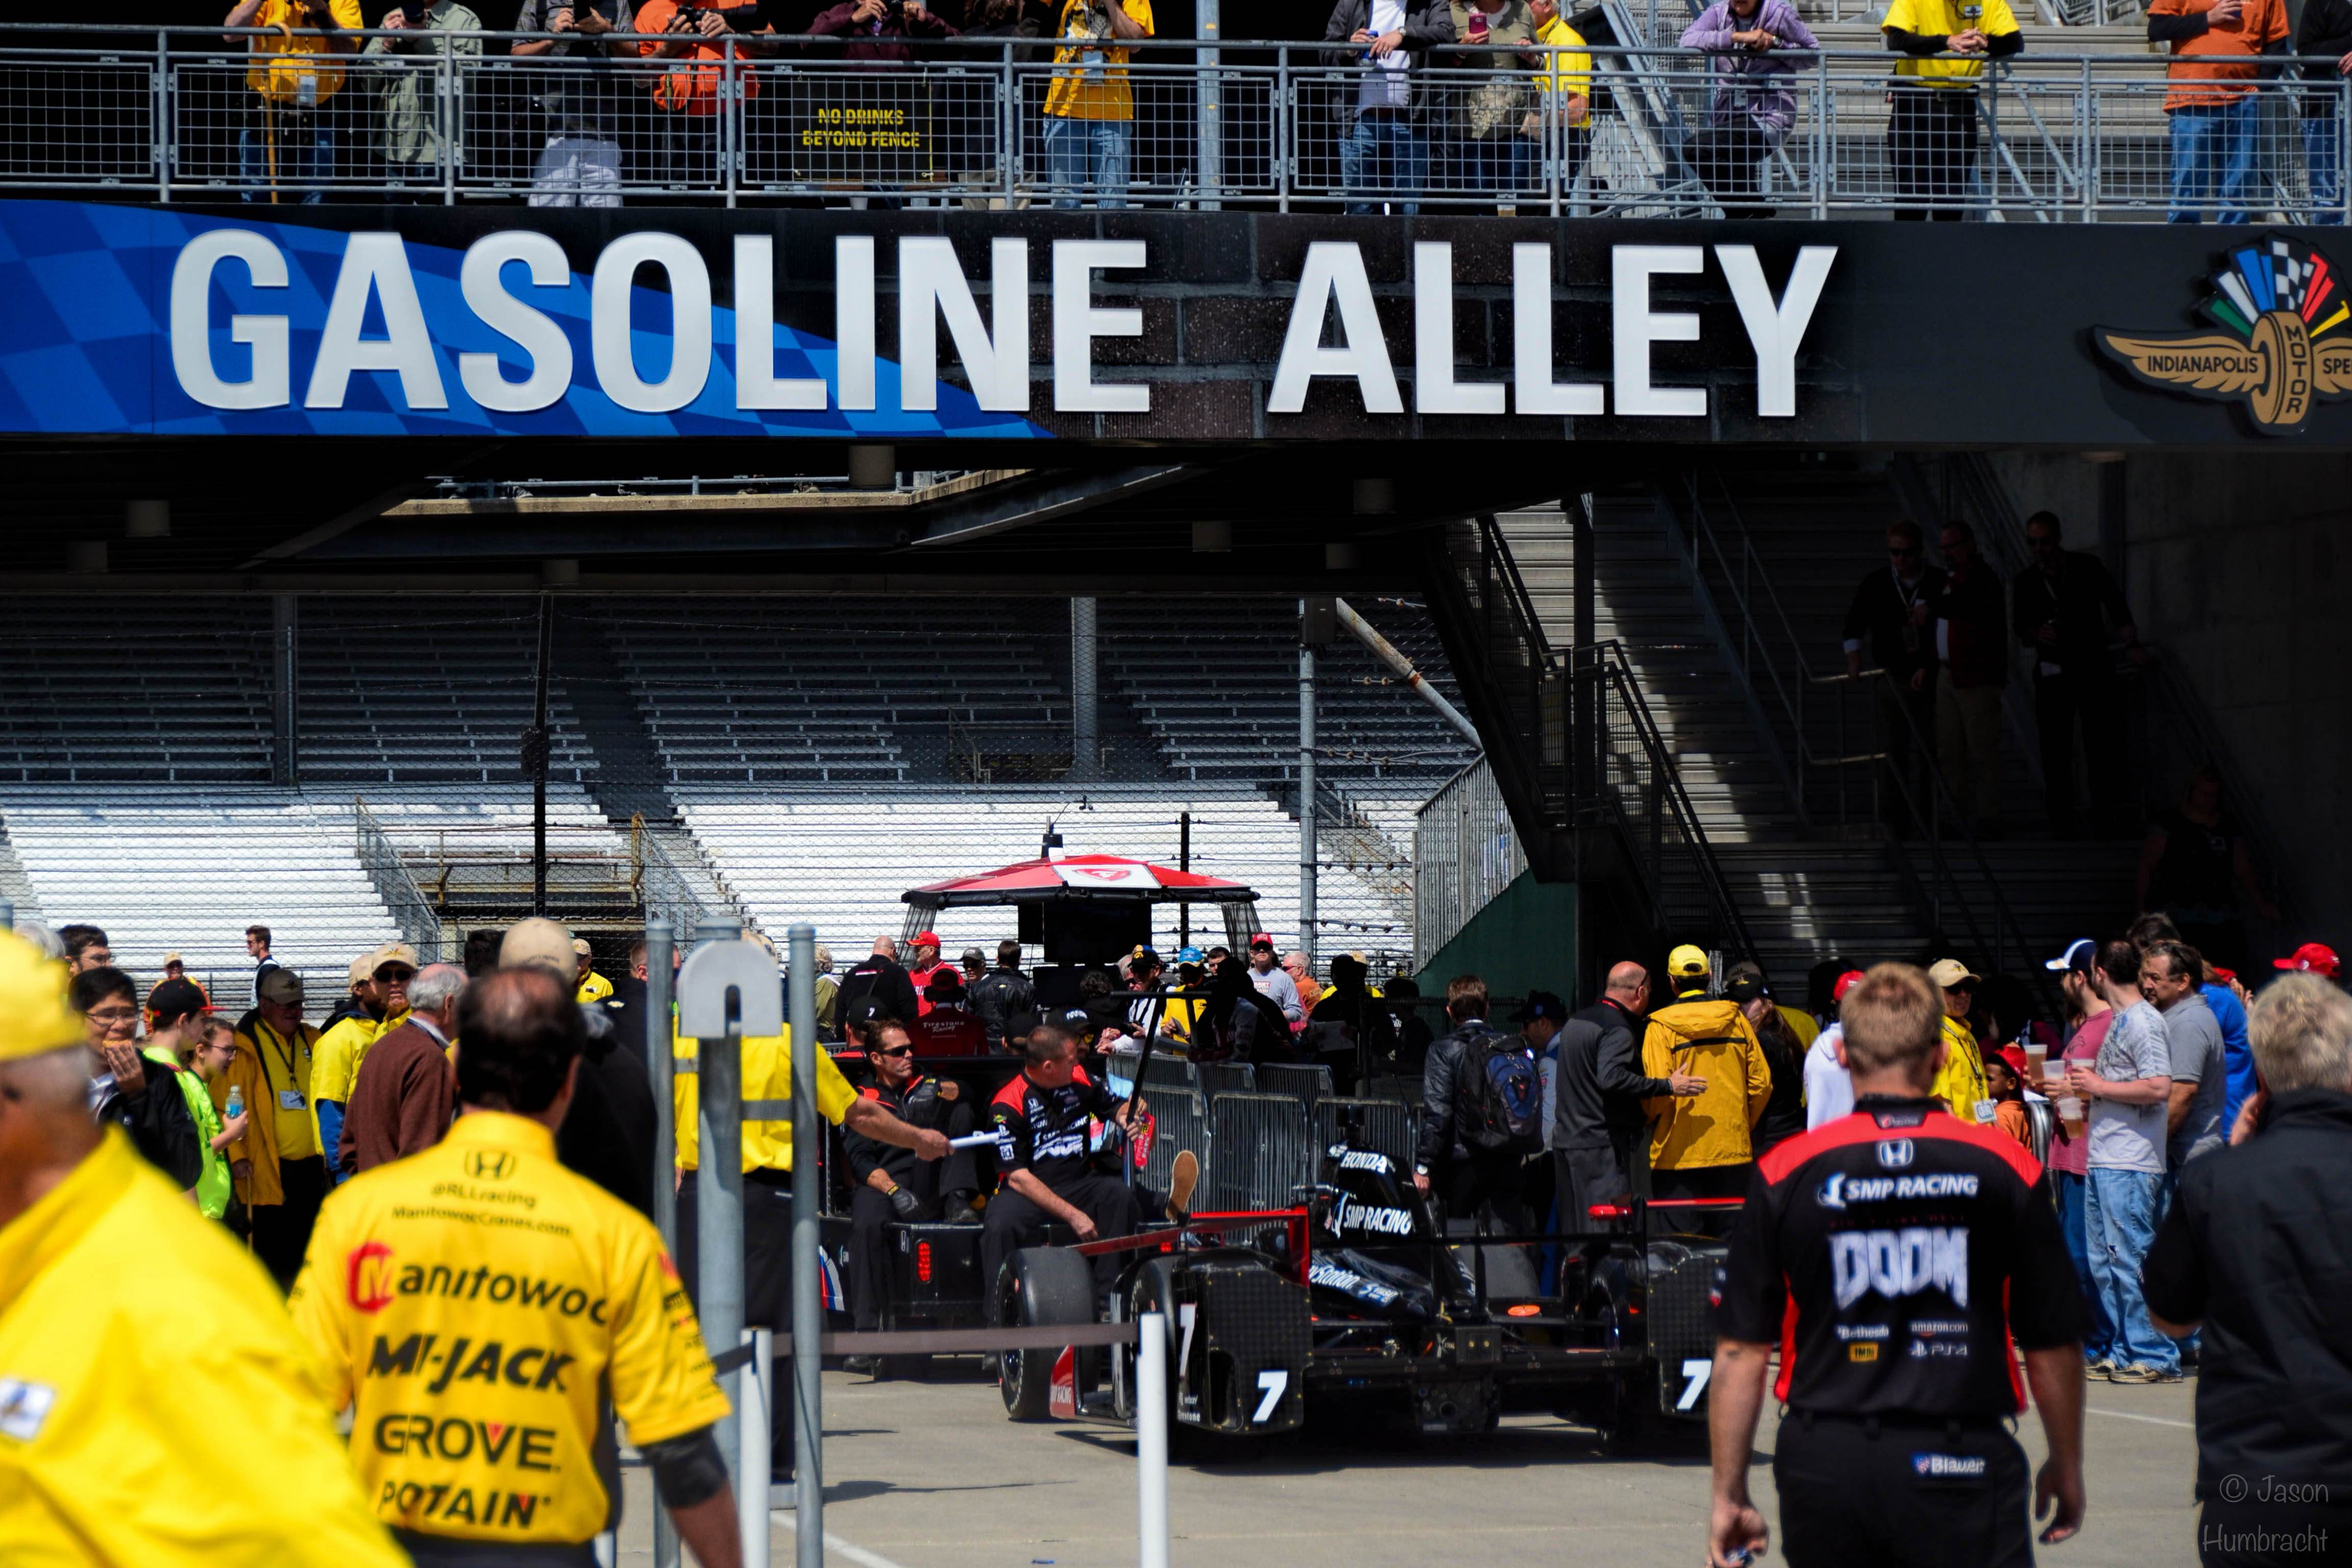 Indianapolis 500 100th Running Practice Day | Gasoline Alley | Indianapolis Motor Speedway | Image By Indiana Architectural Photographer Jason Humbracht